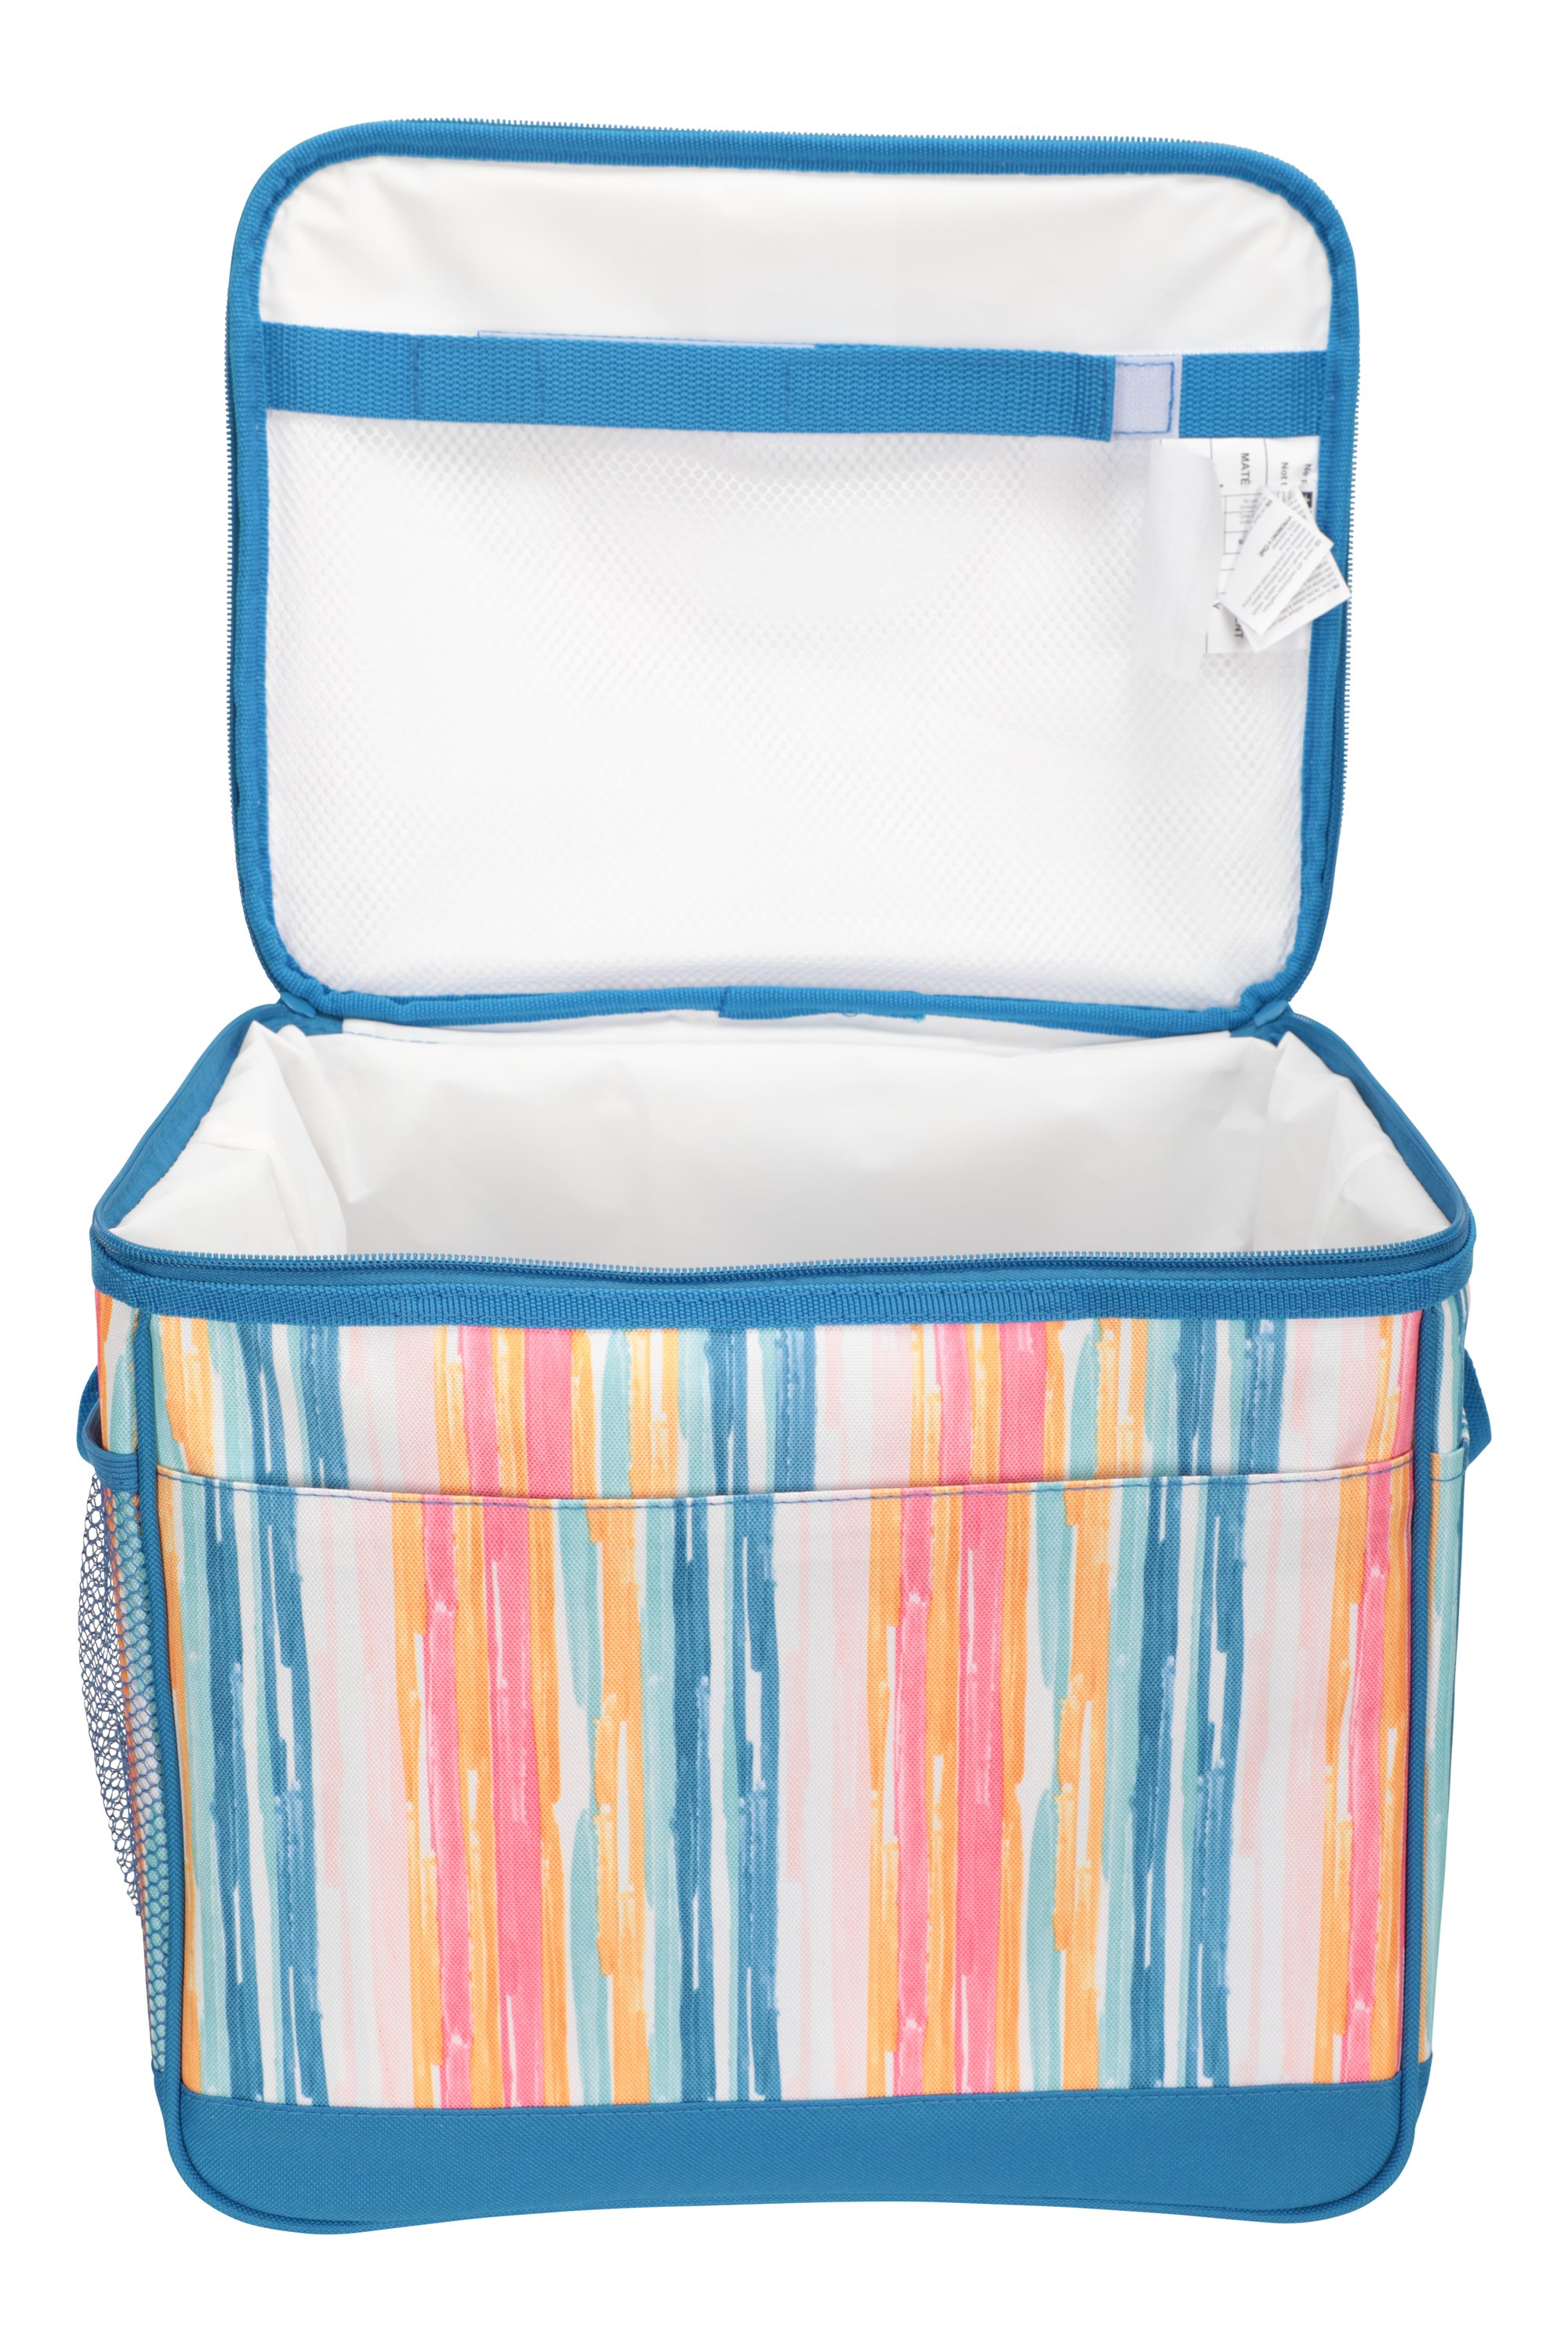 Patterned Kids & Adult Lunch Box Mountain Warehouse 25L Cool Bag 